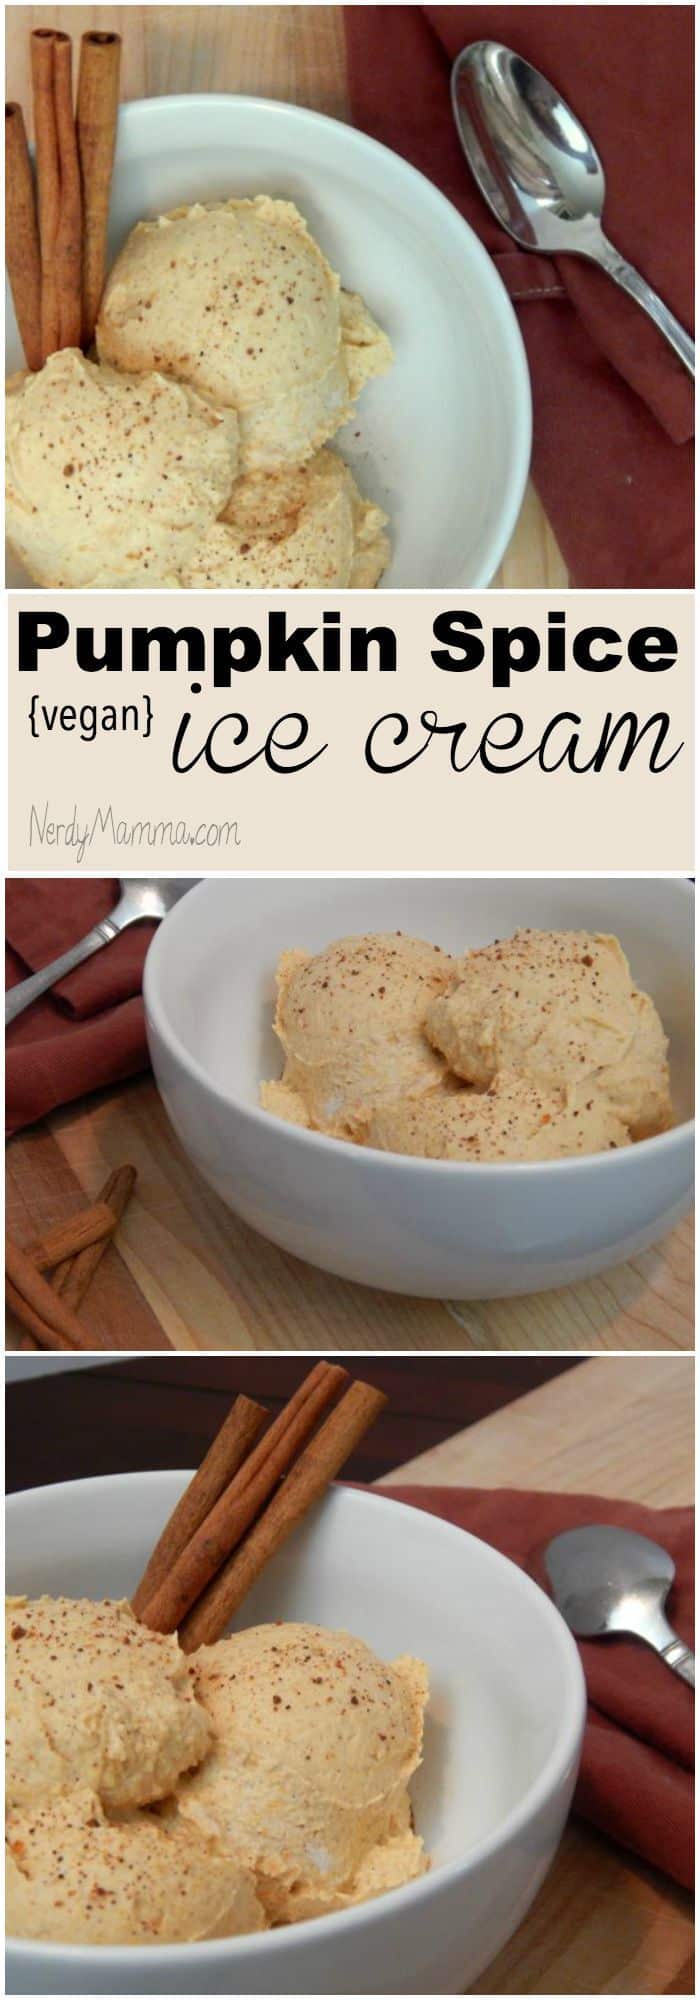 This pumpkin spice ice cream is egg-free and dairy-free. Just good, clean deliciousness for the fall.